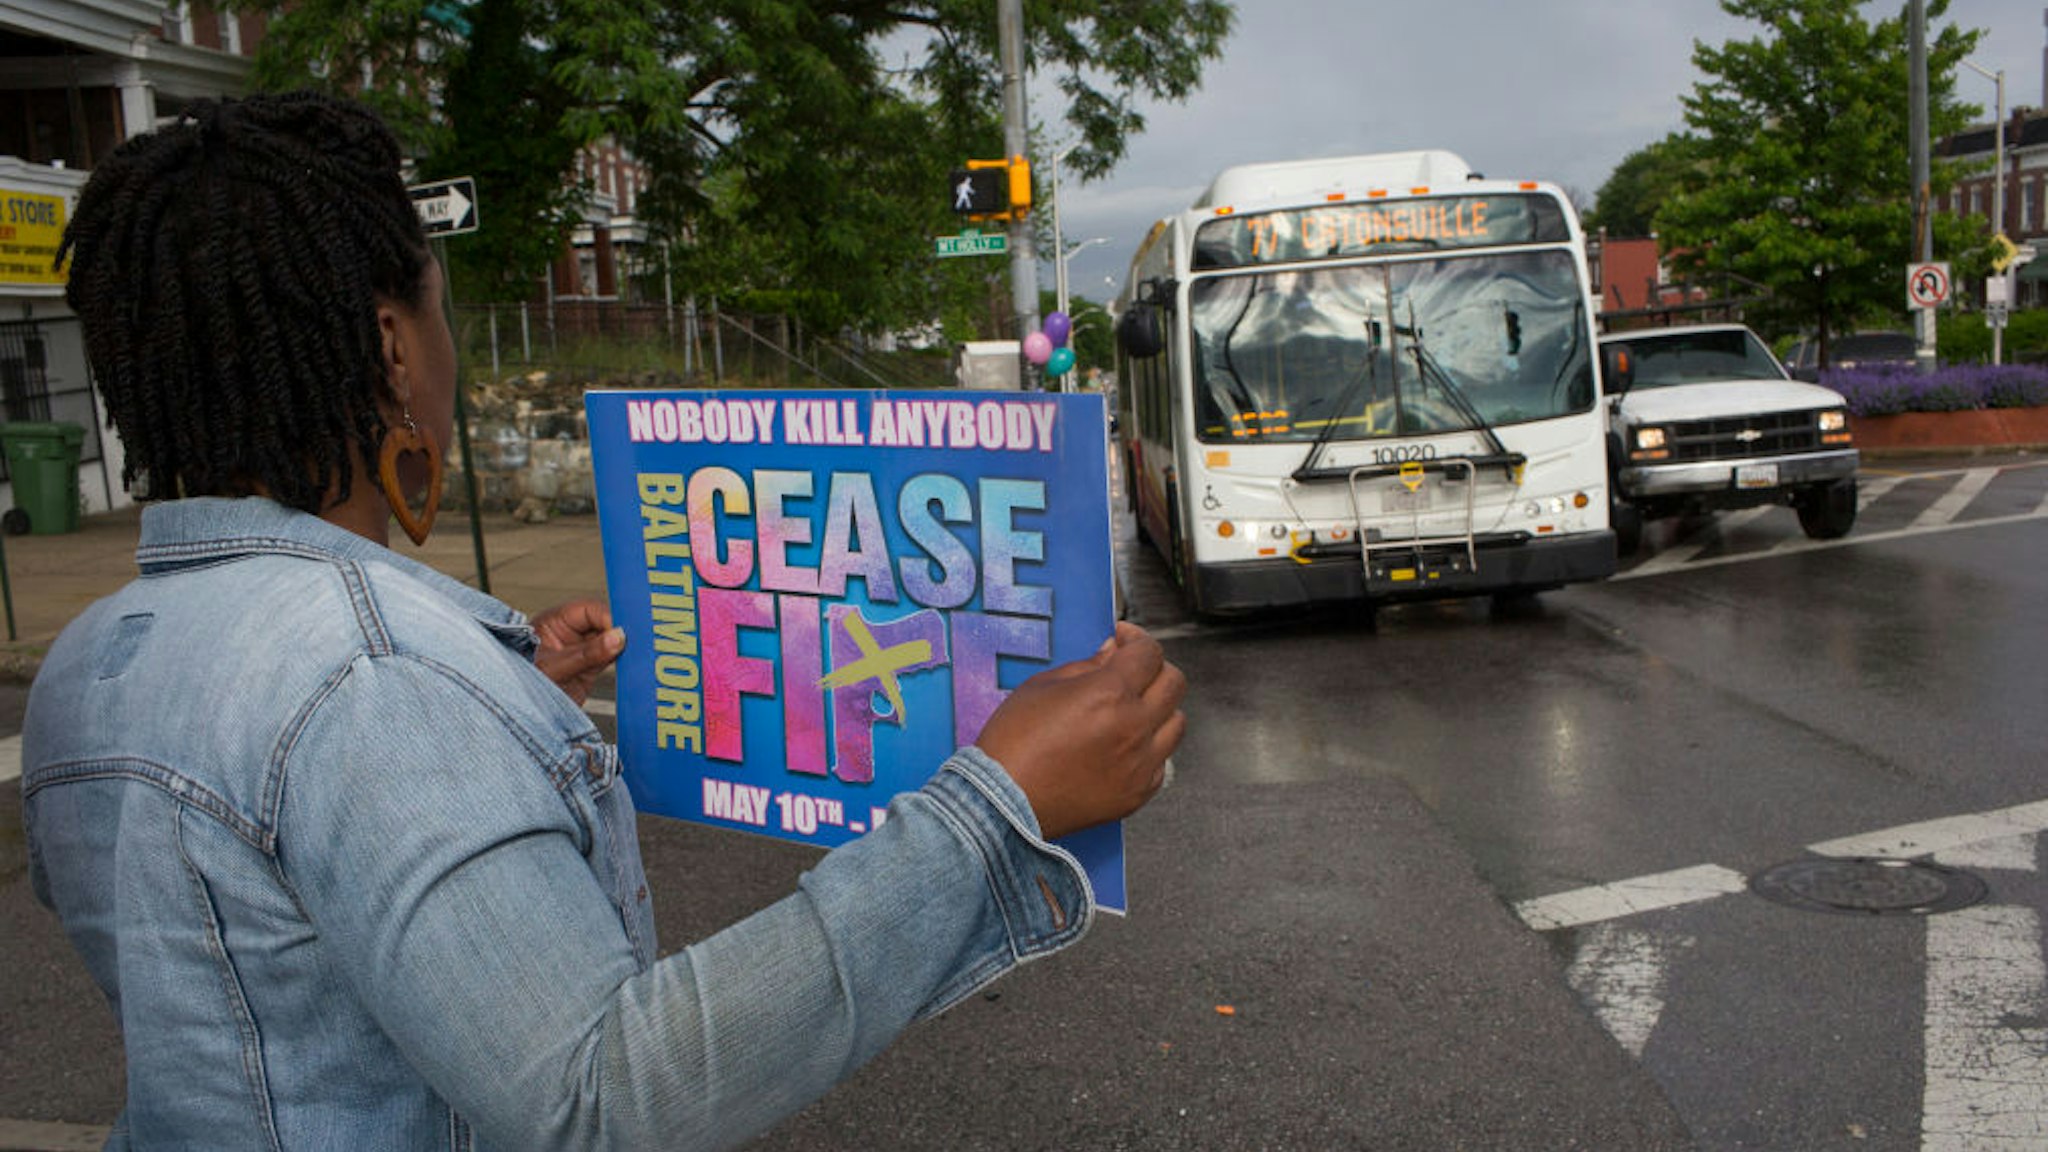 Ceasefire Baltimore, an anti-violence group, holds a kickoff rally to call for a Mother's Day weekend without any violence on May 10, 2019 in Baltimore, Maryland.(Photo by Andrew Lichtenstein/Corbis via Getty Images)